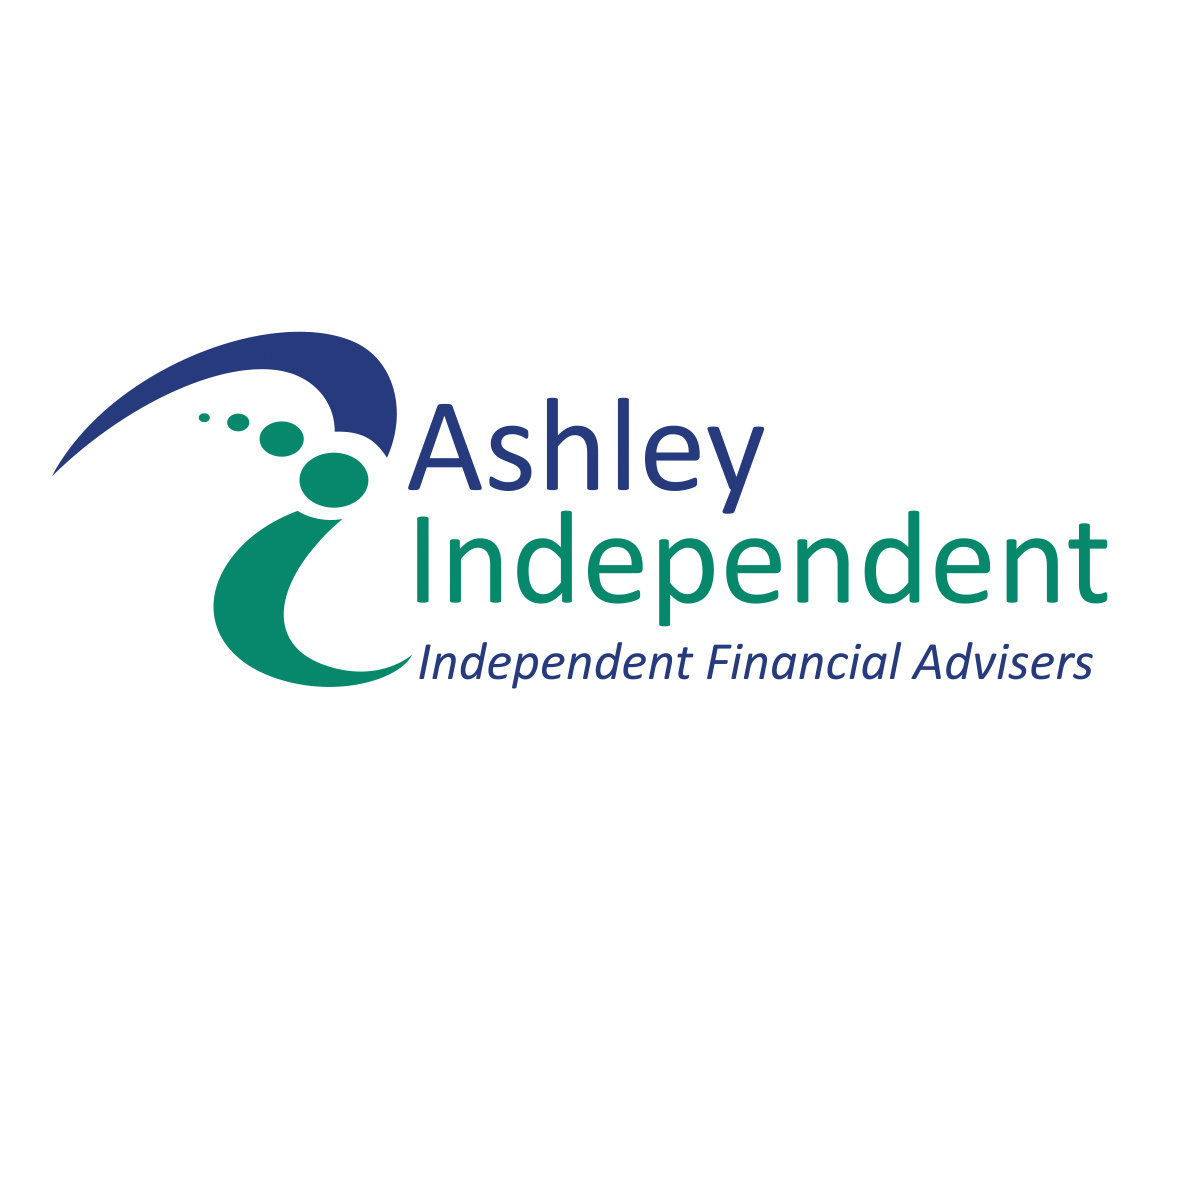 Ashley Independent Financial Advisers 03